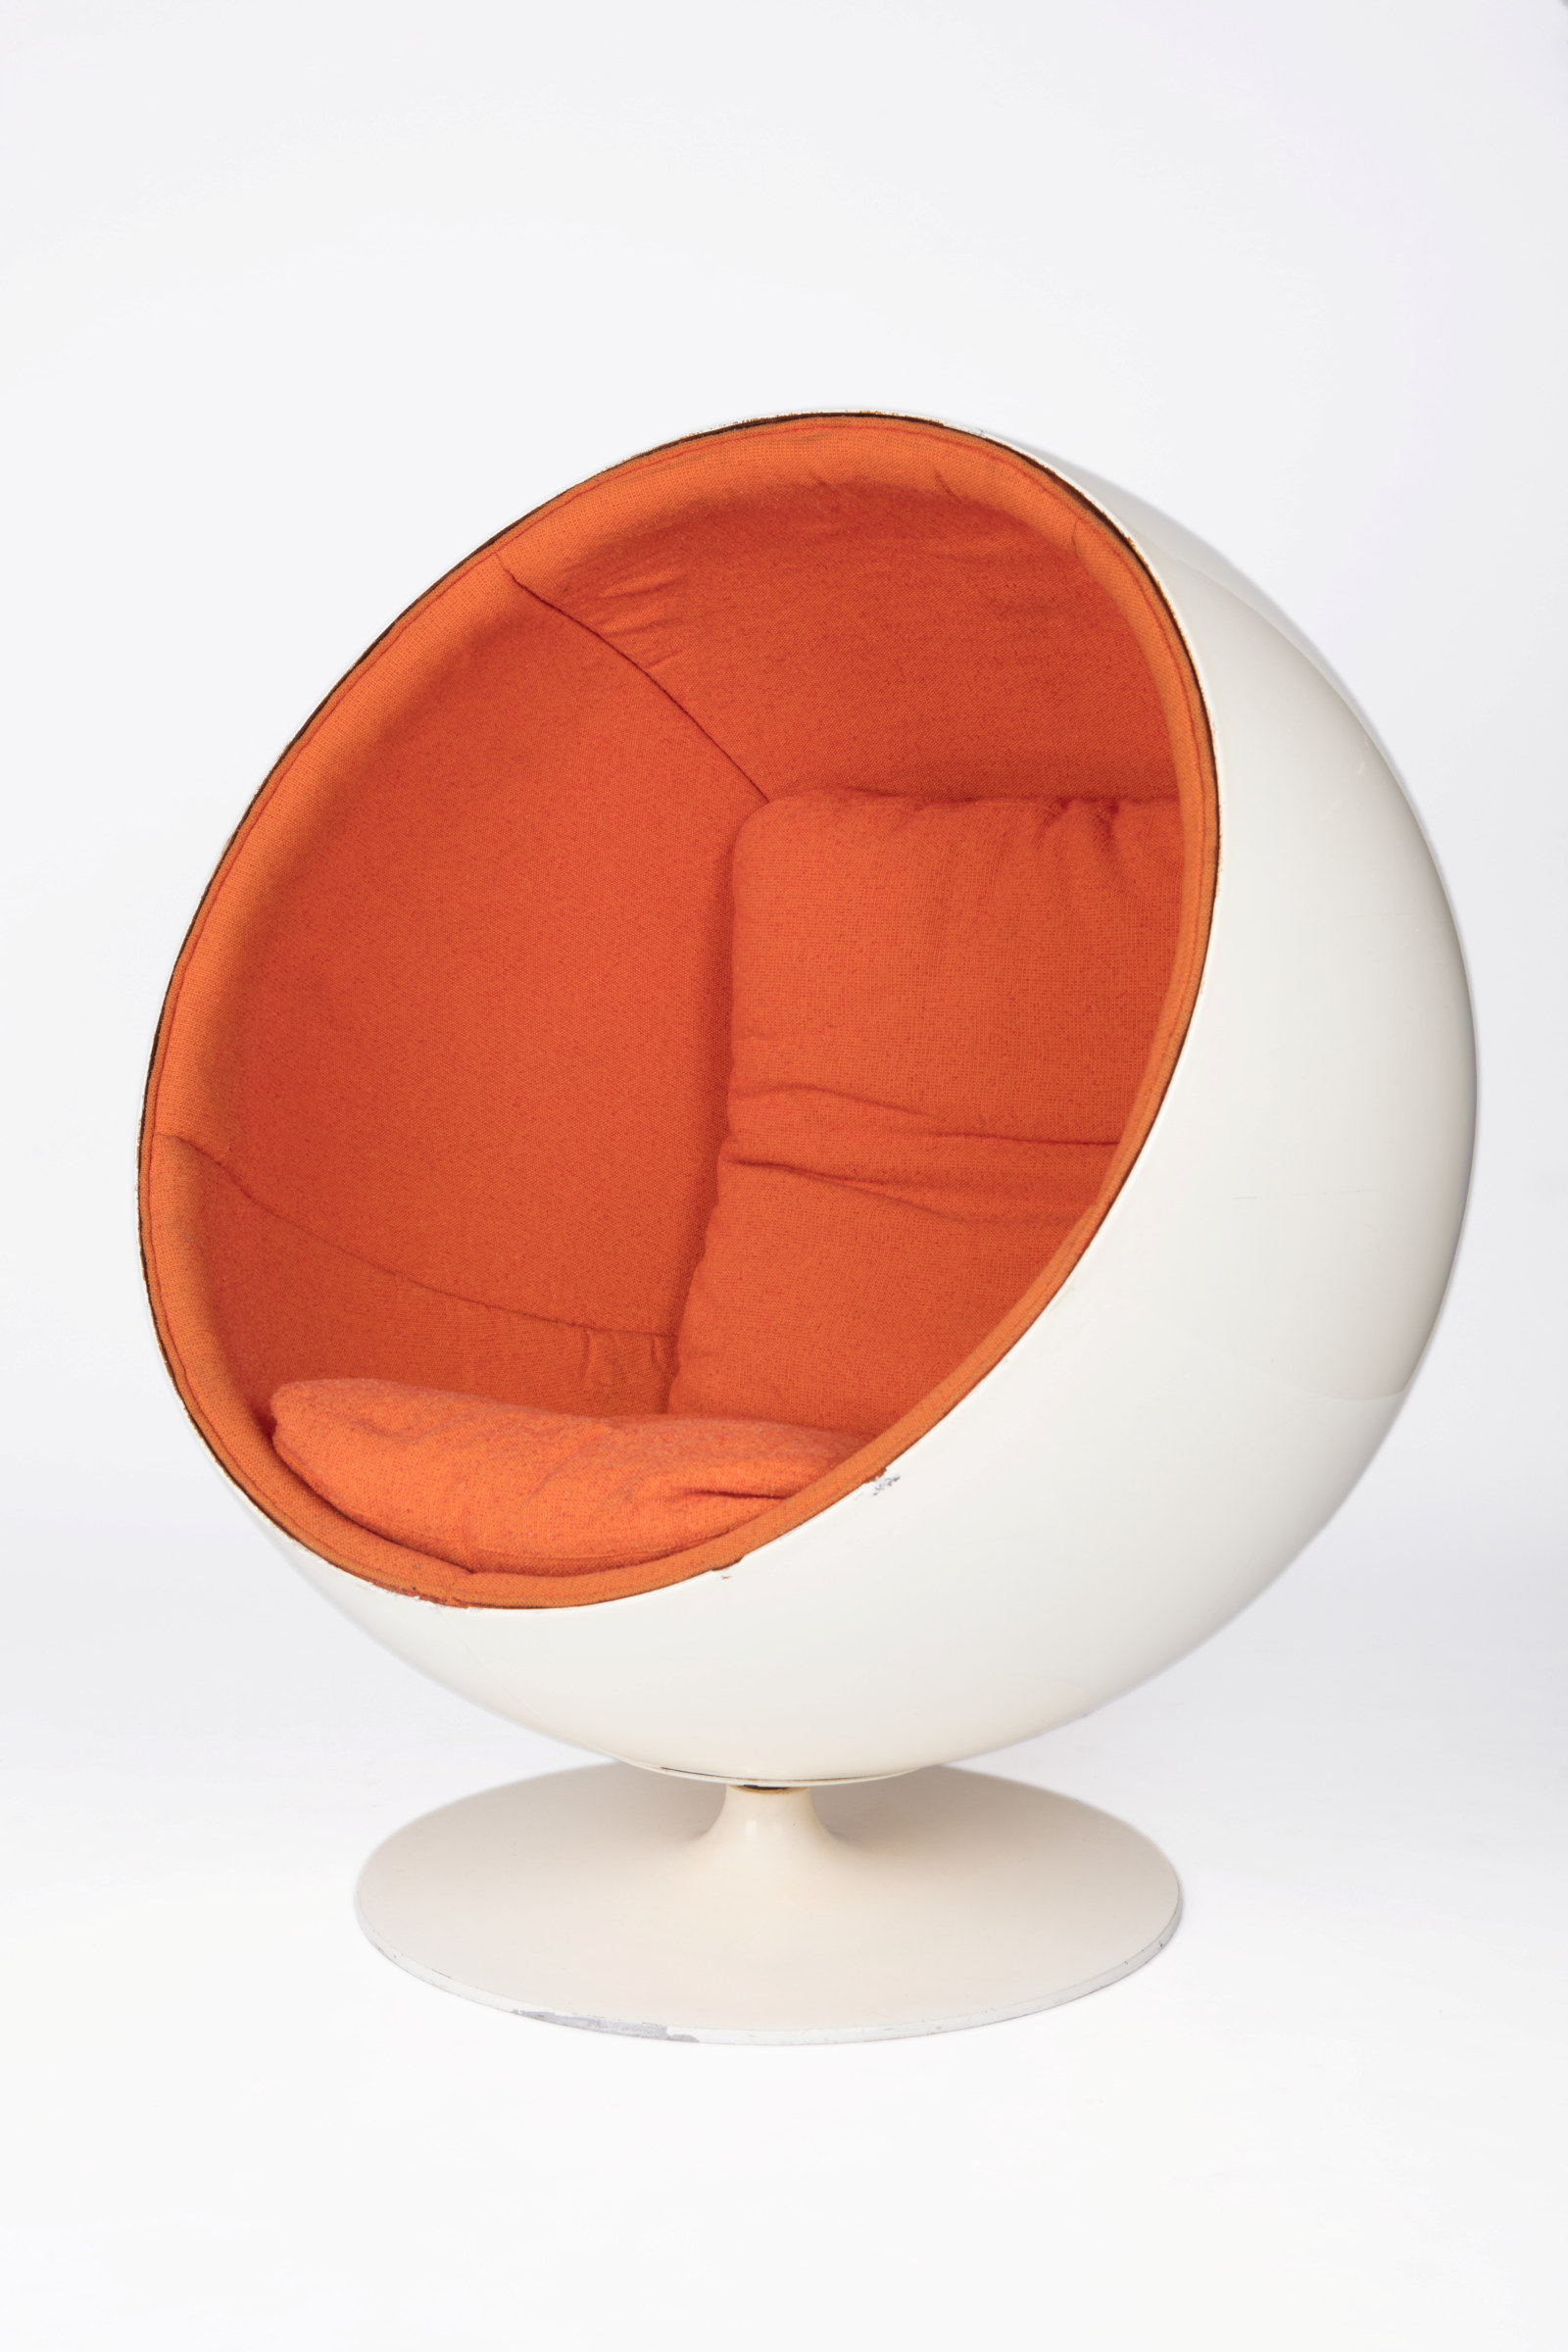 Pallo/Ball Chair or Globe Chair, designed by Eero Aarnio for Asko, Finland, 1966